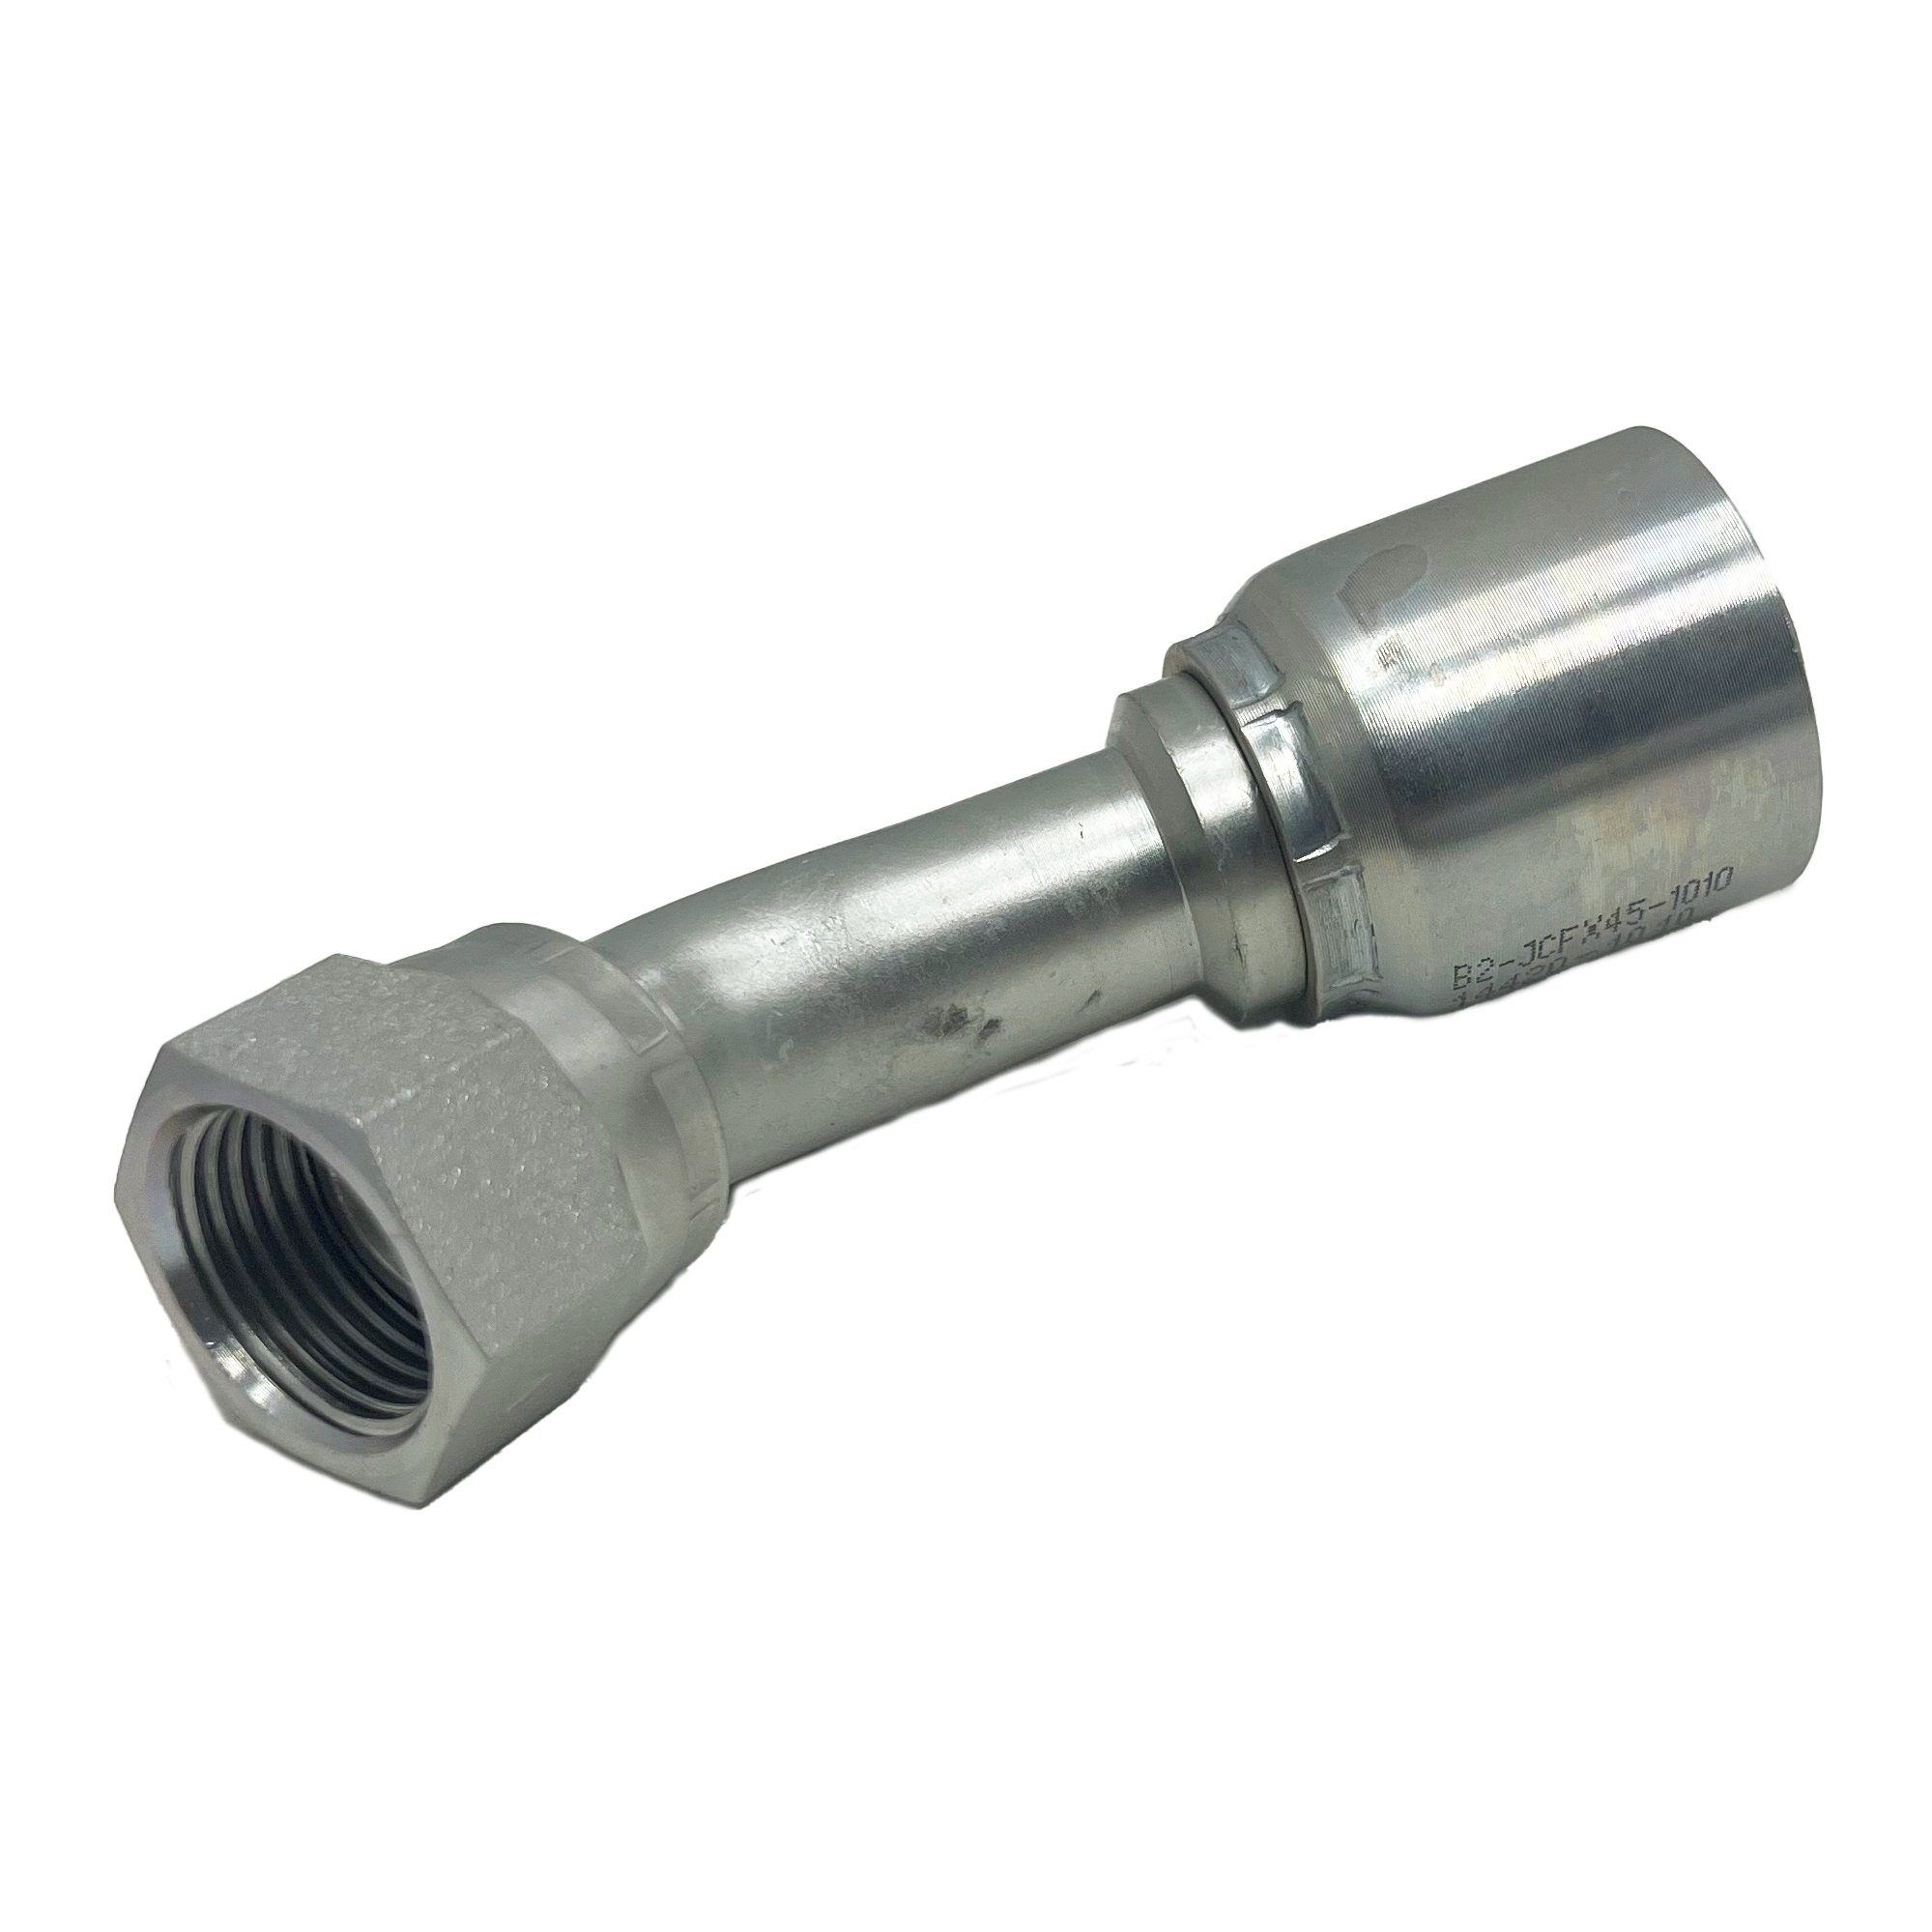 B2-JCFX45-0406: Continental Hose Fitting, 0.25 (1/4") Hose ID x 9/16-18 Female JIC, 45-Degree Swivel Connection